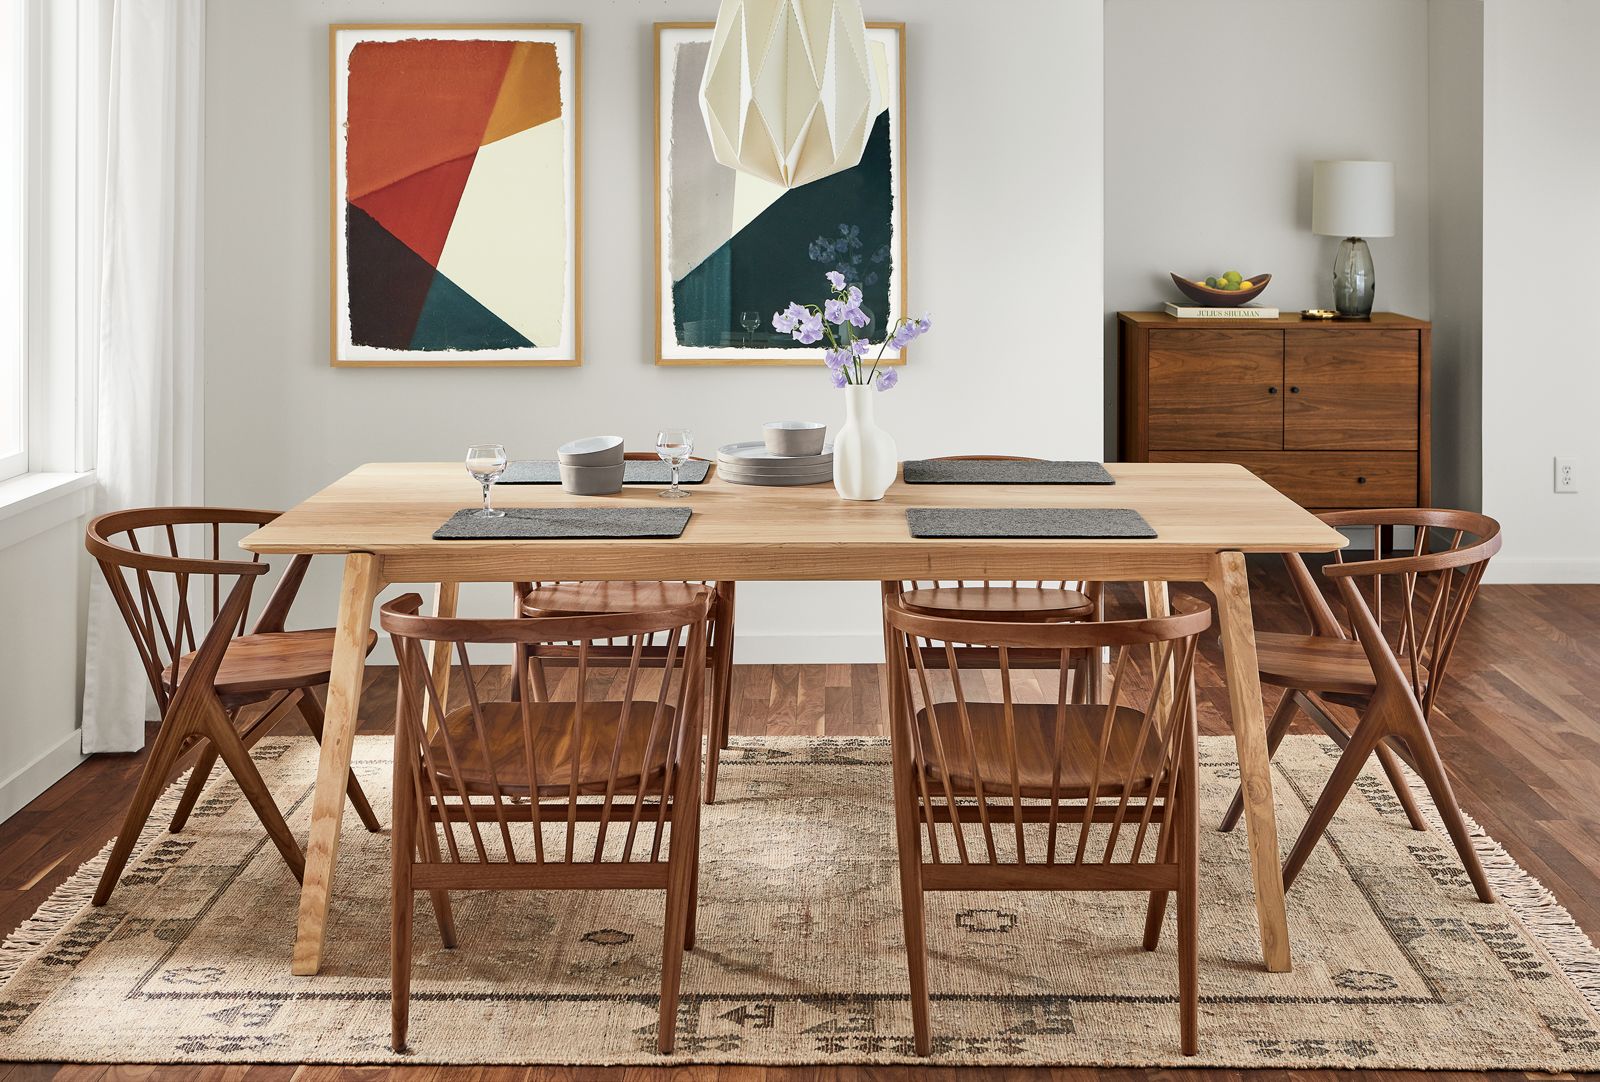 dining room featuring orlin table in heartwood ash and soren chairs in walnut.